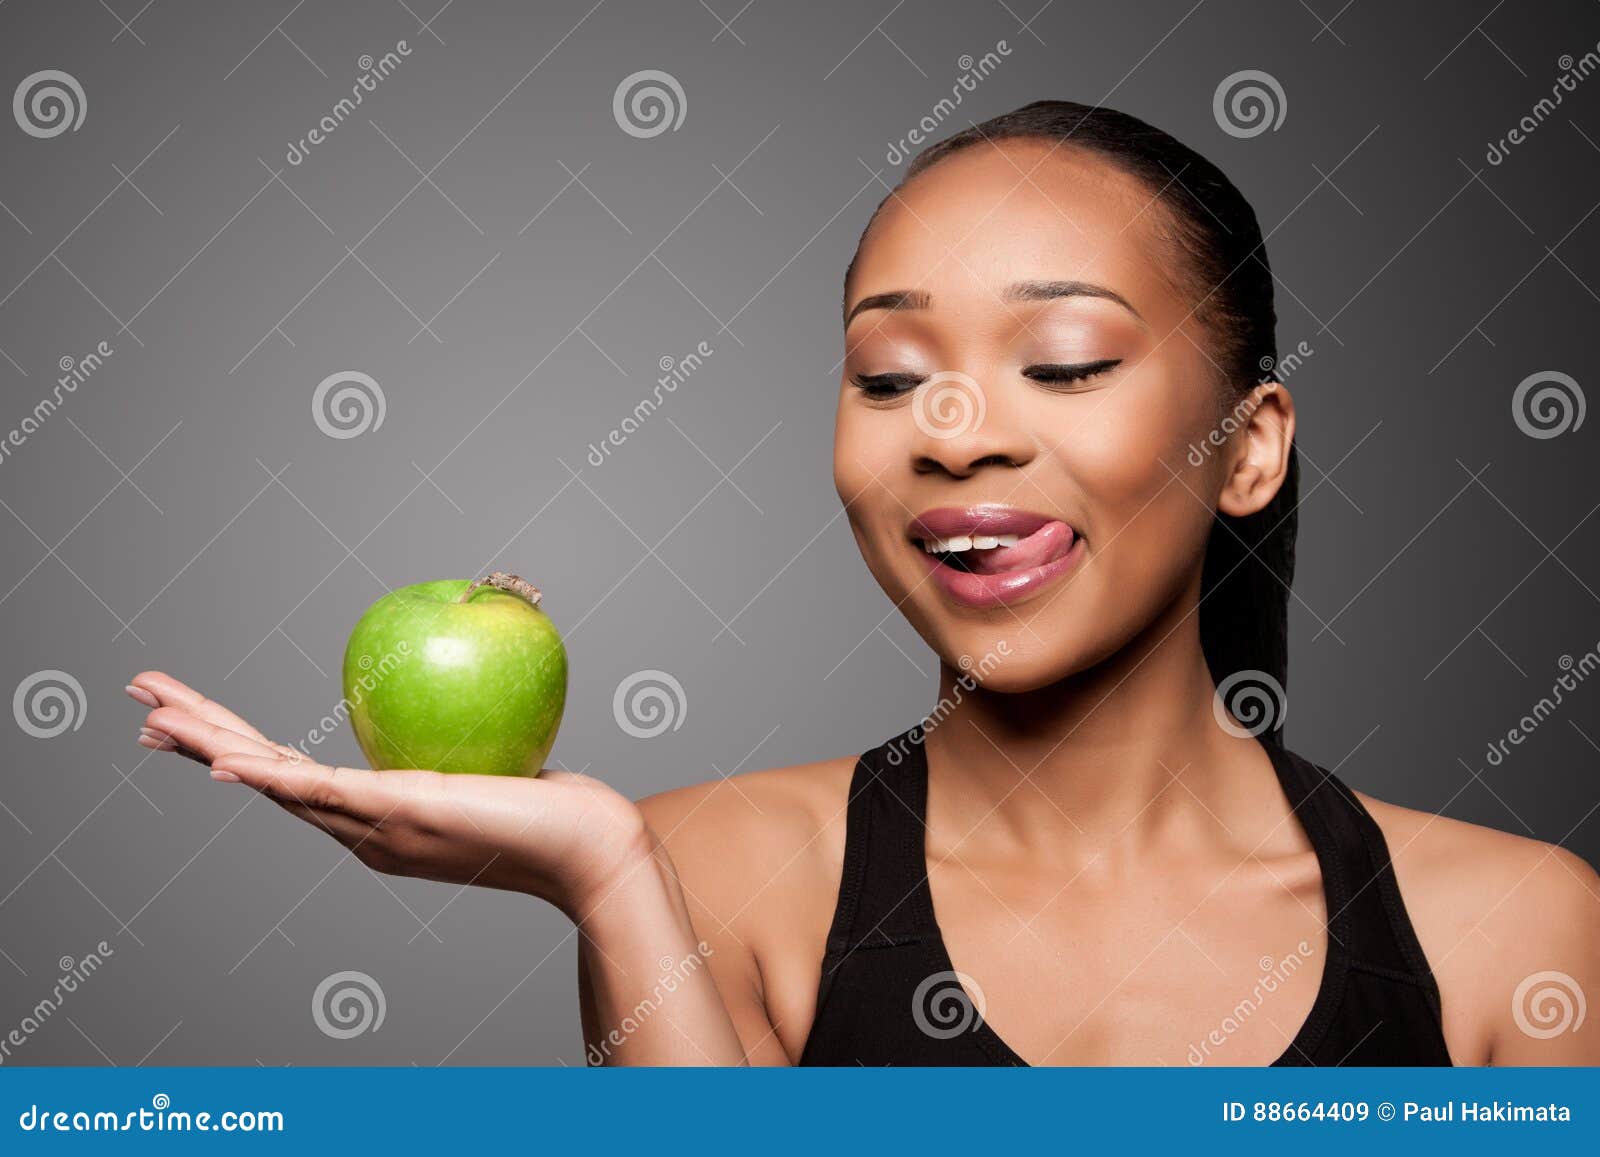 Happy Healthy Black Asian Woman With Delicious Apple Stock Image Image Of Attractive Food